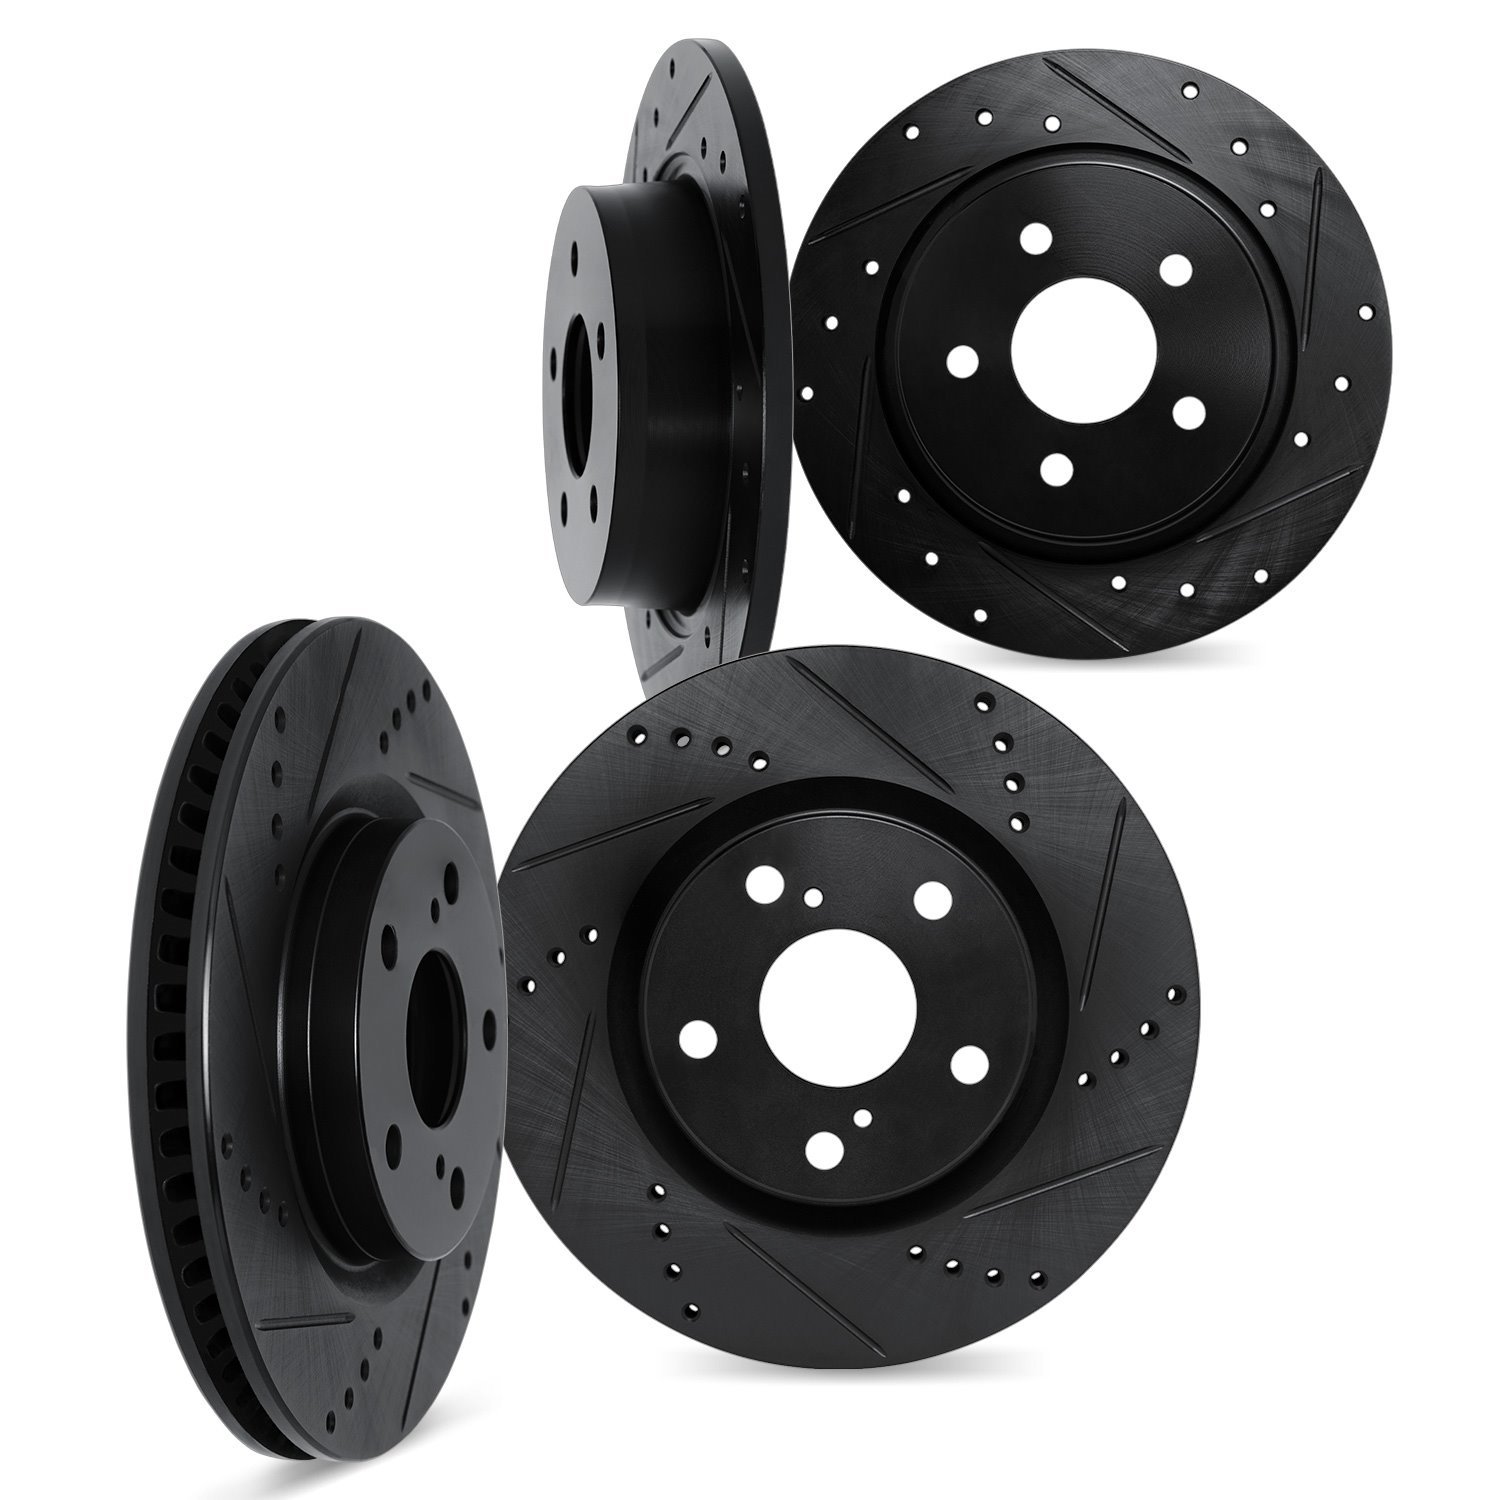 8004-01016 Drilled/Slotted Brake Rotors [Black], 2014-2019 Suzuki, Position: Front and Rear